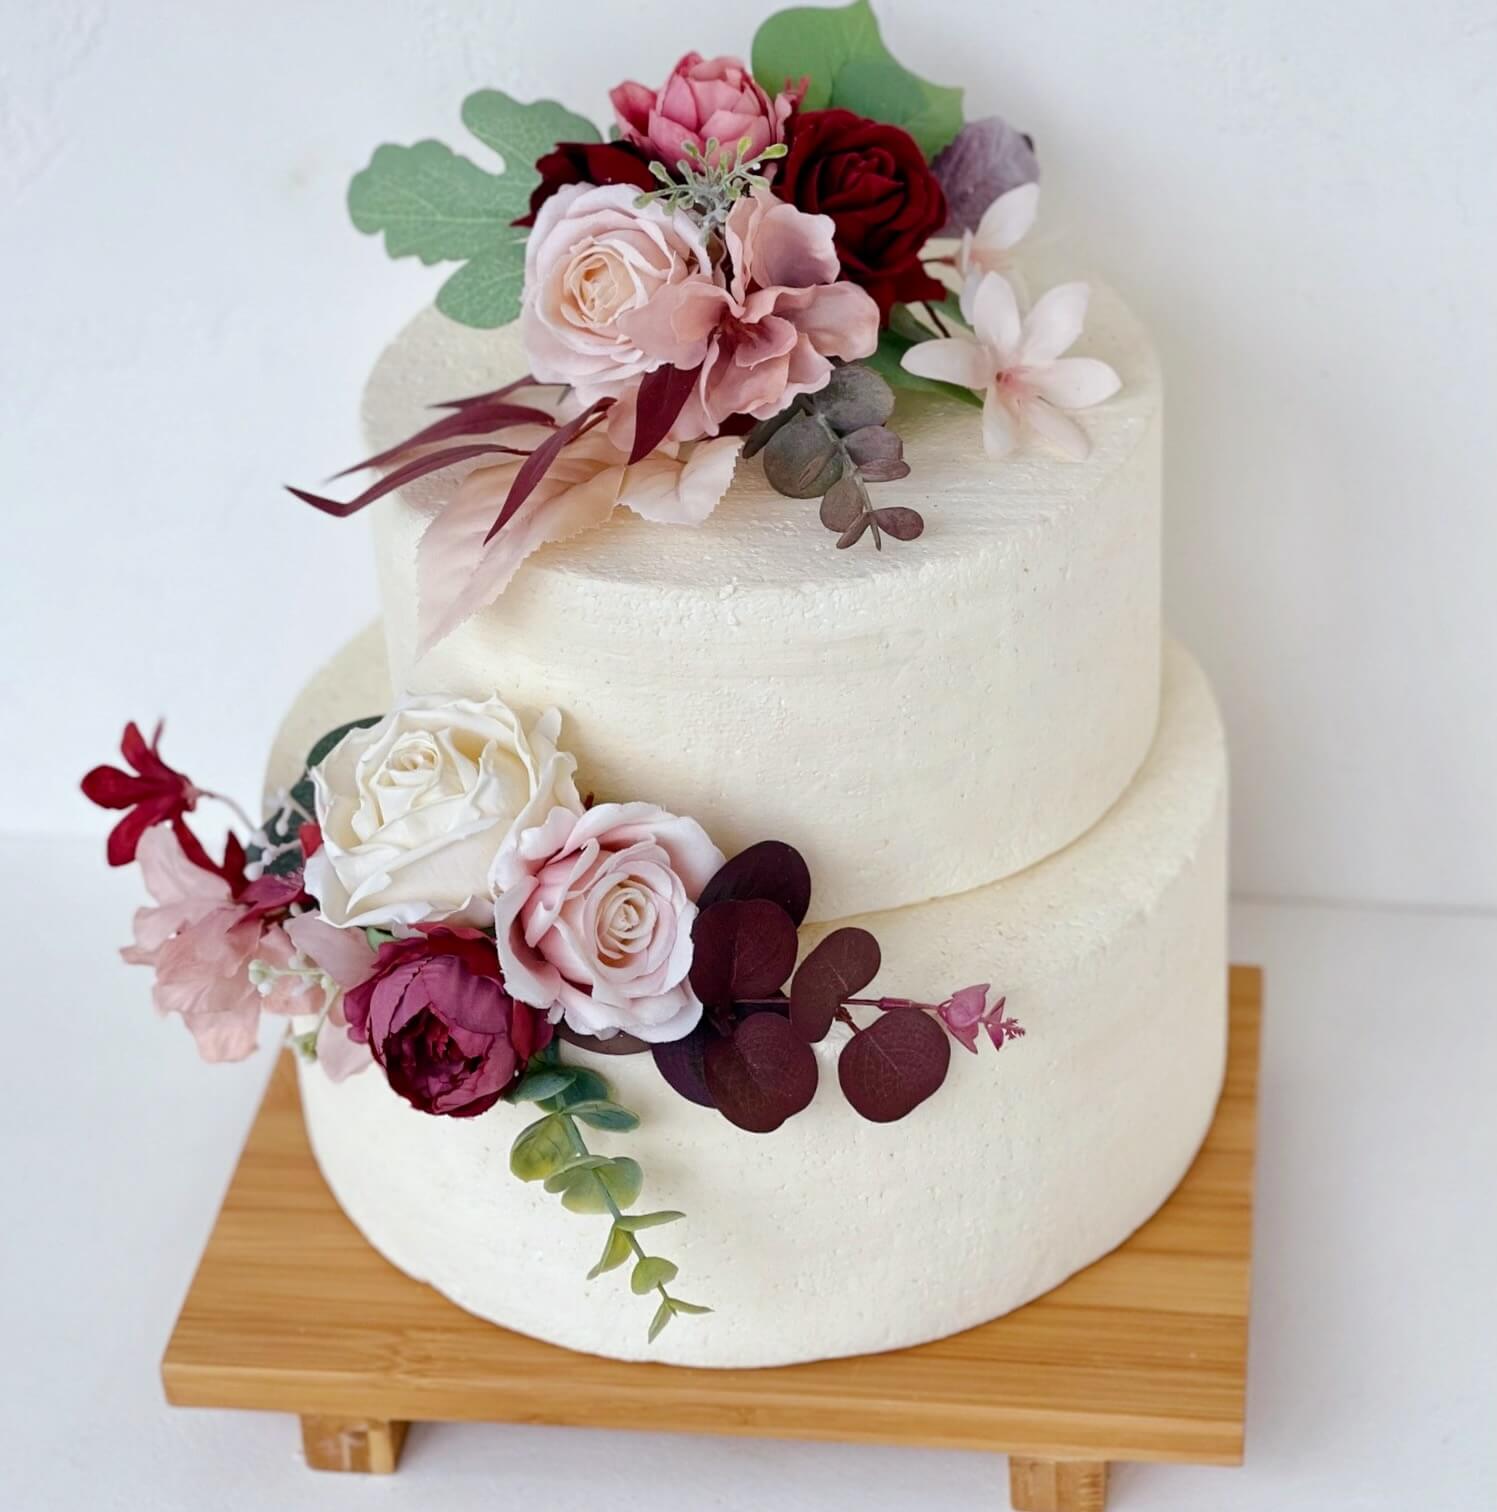 7 Best Ways to Add Flowers to Your Wedding Cake | Make Extra Special